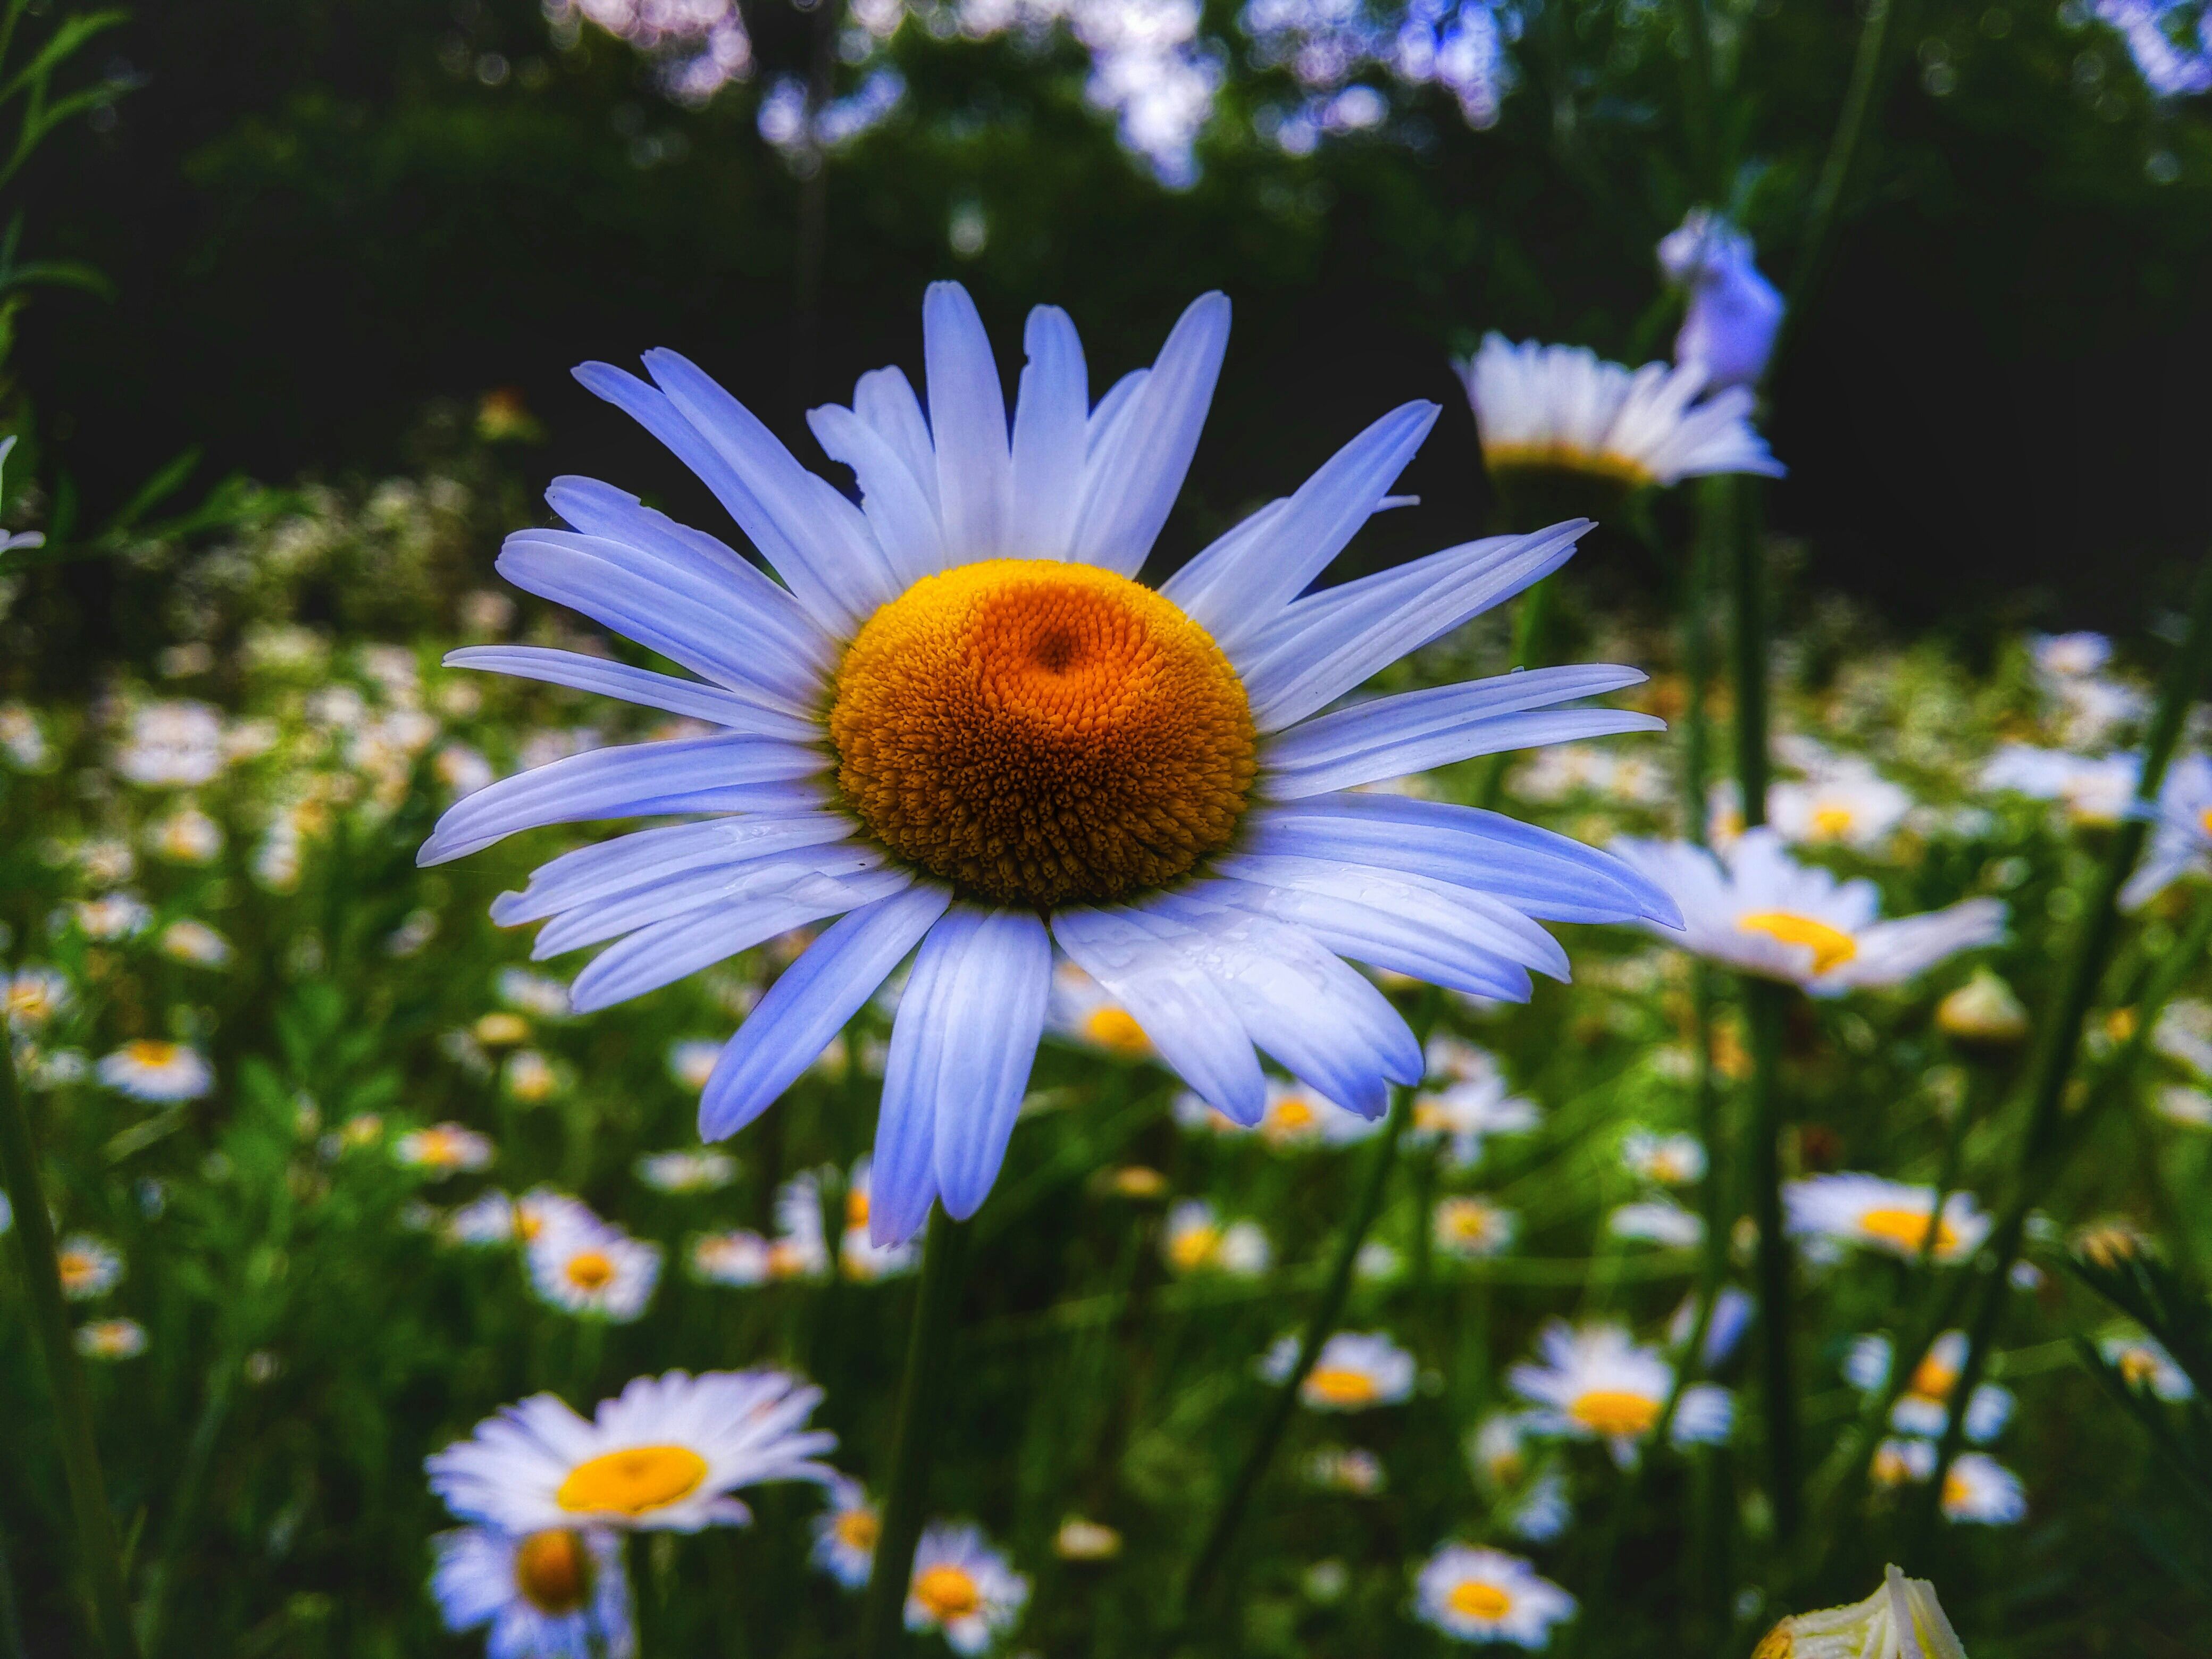 Things You Didn't Know About Daisies - Daisy Fun Facts